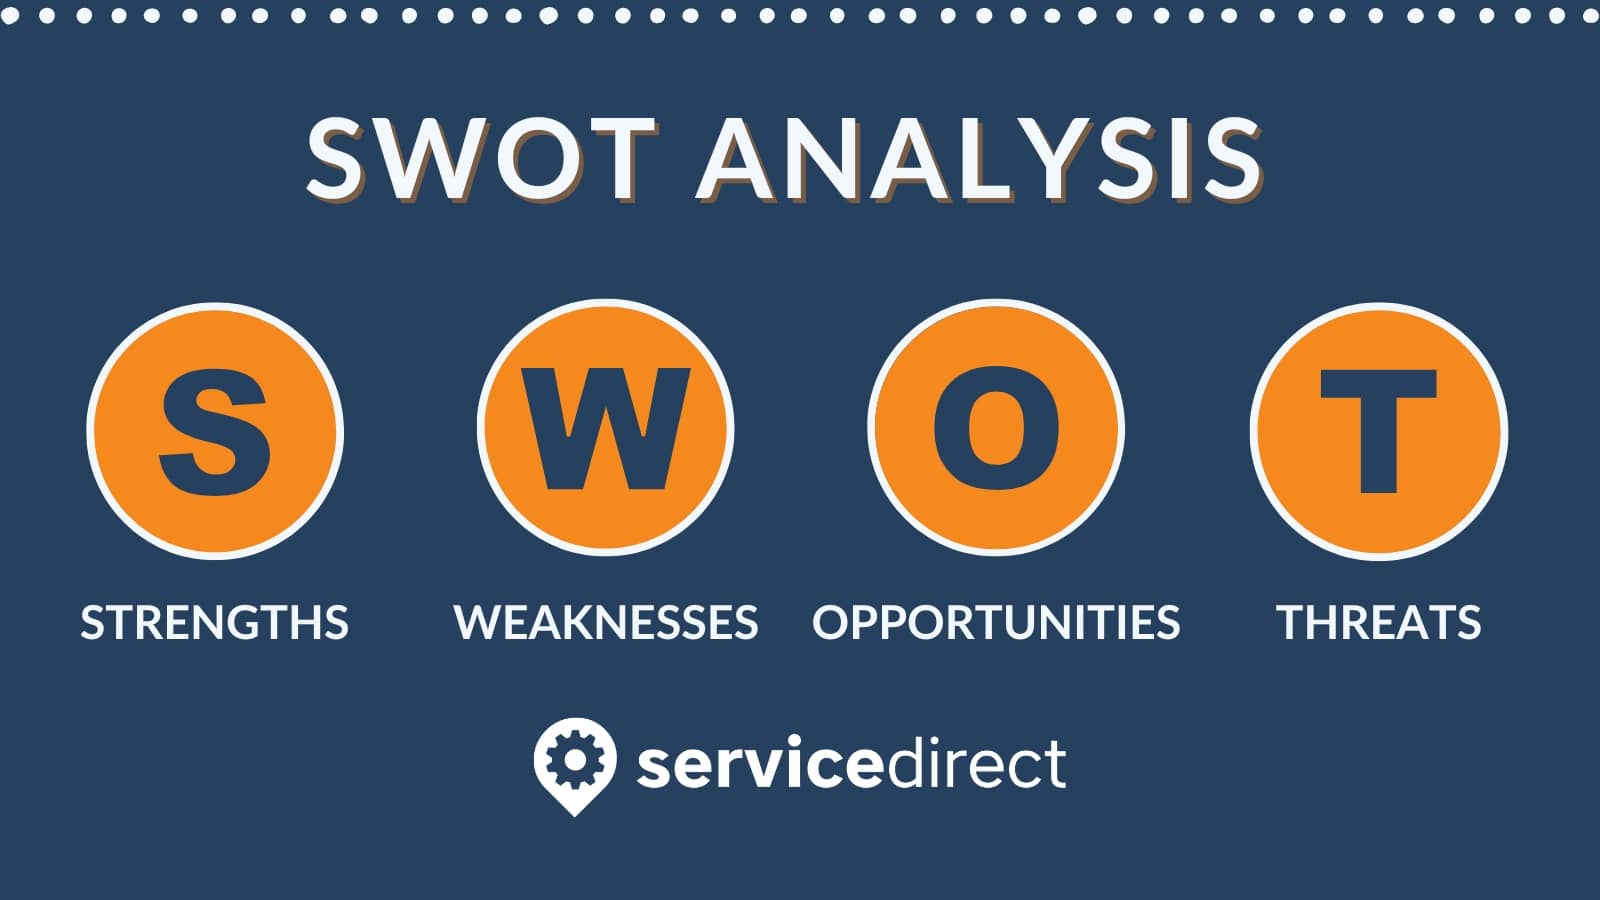 A SWOT analysis is made up of a business's strengths, weaknesses, opportunities, and threats. 